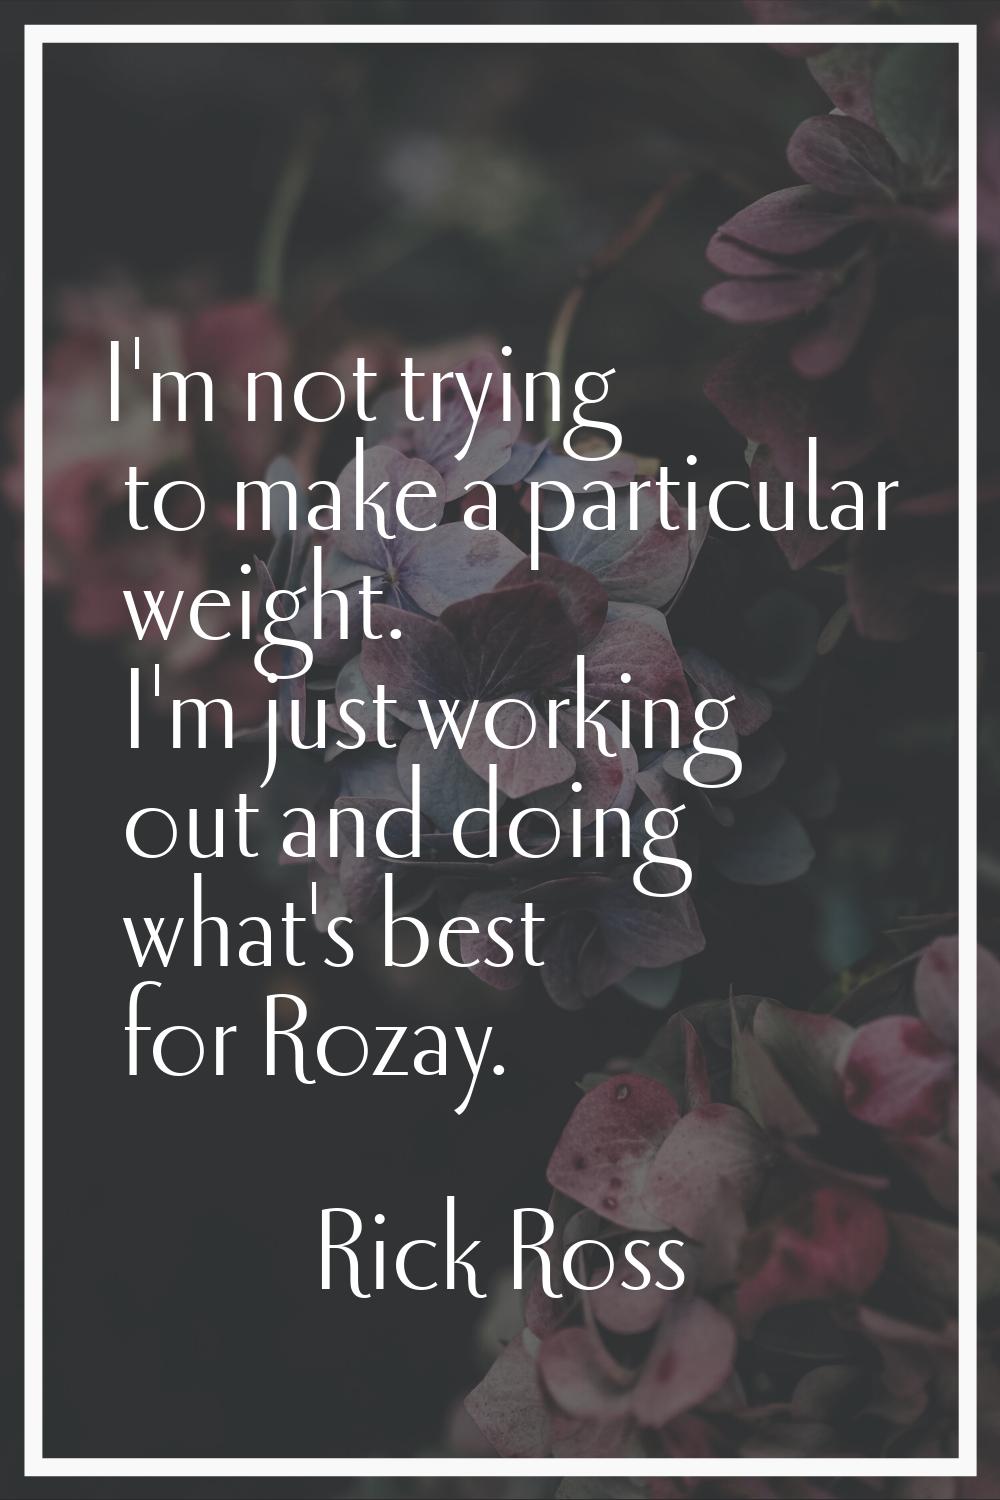 I'm not trying to make a particular weight. I'm just working out and doing what's best for Rozay.